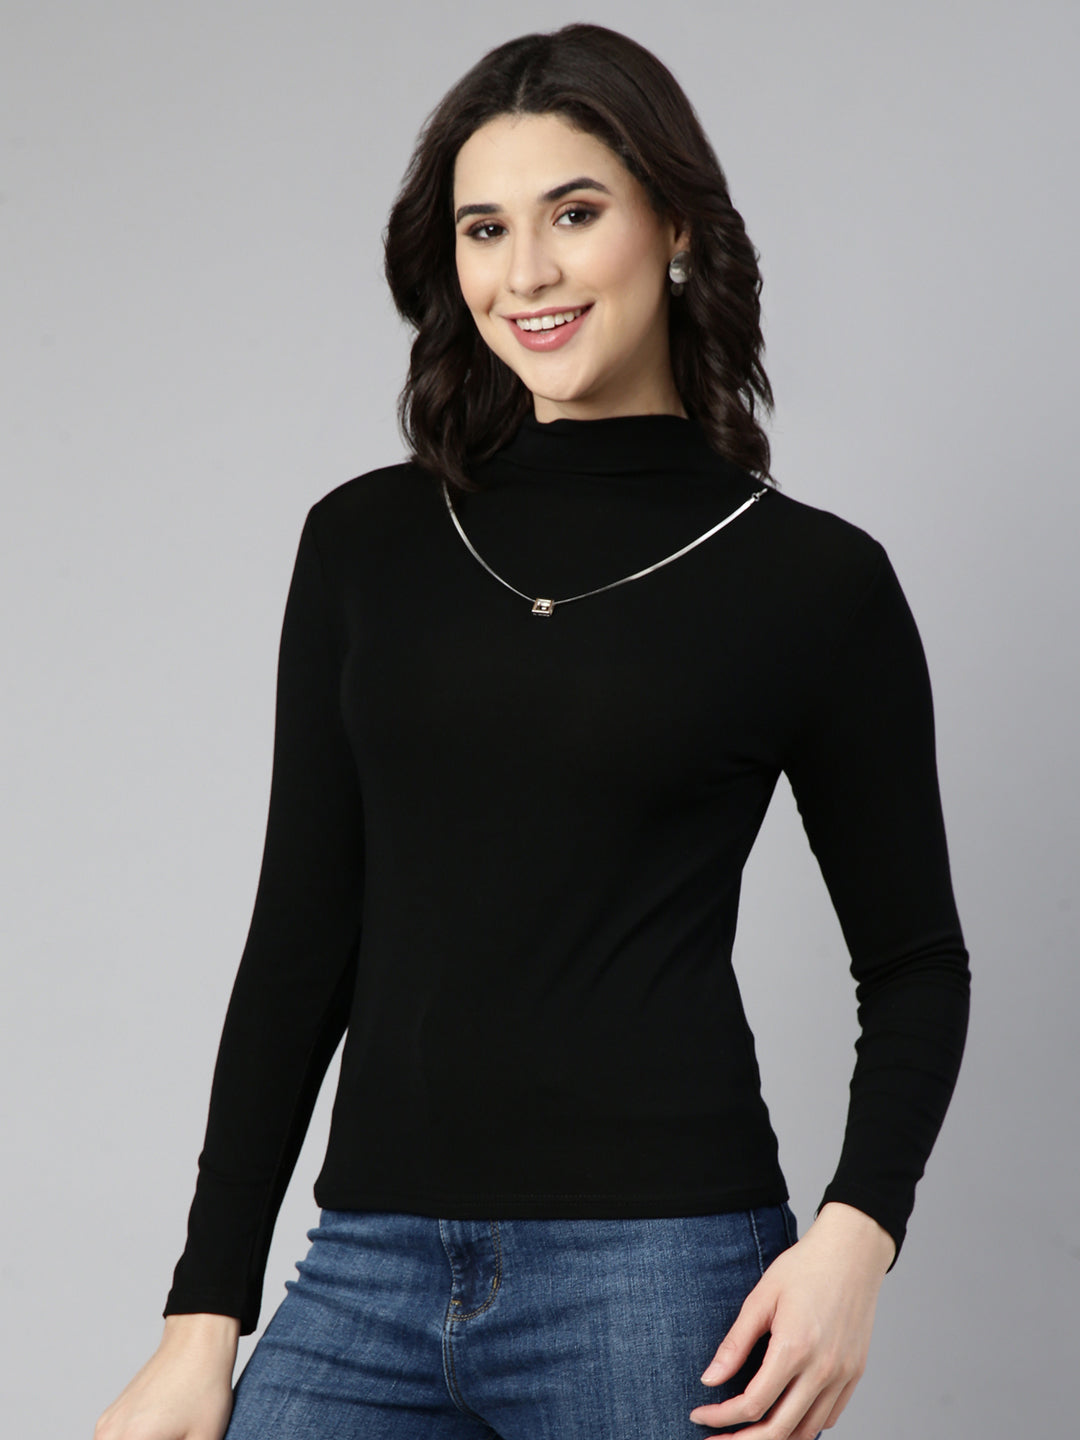 Women Solid Black Top Comes with Neck Chain